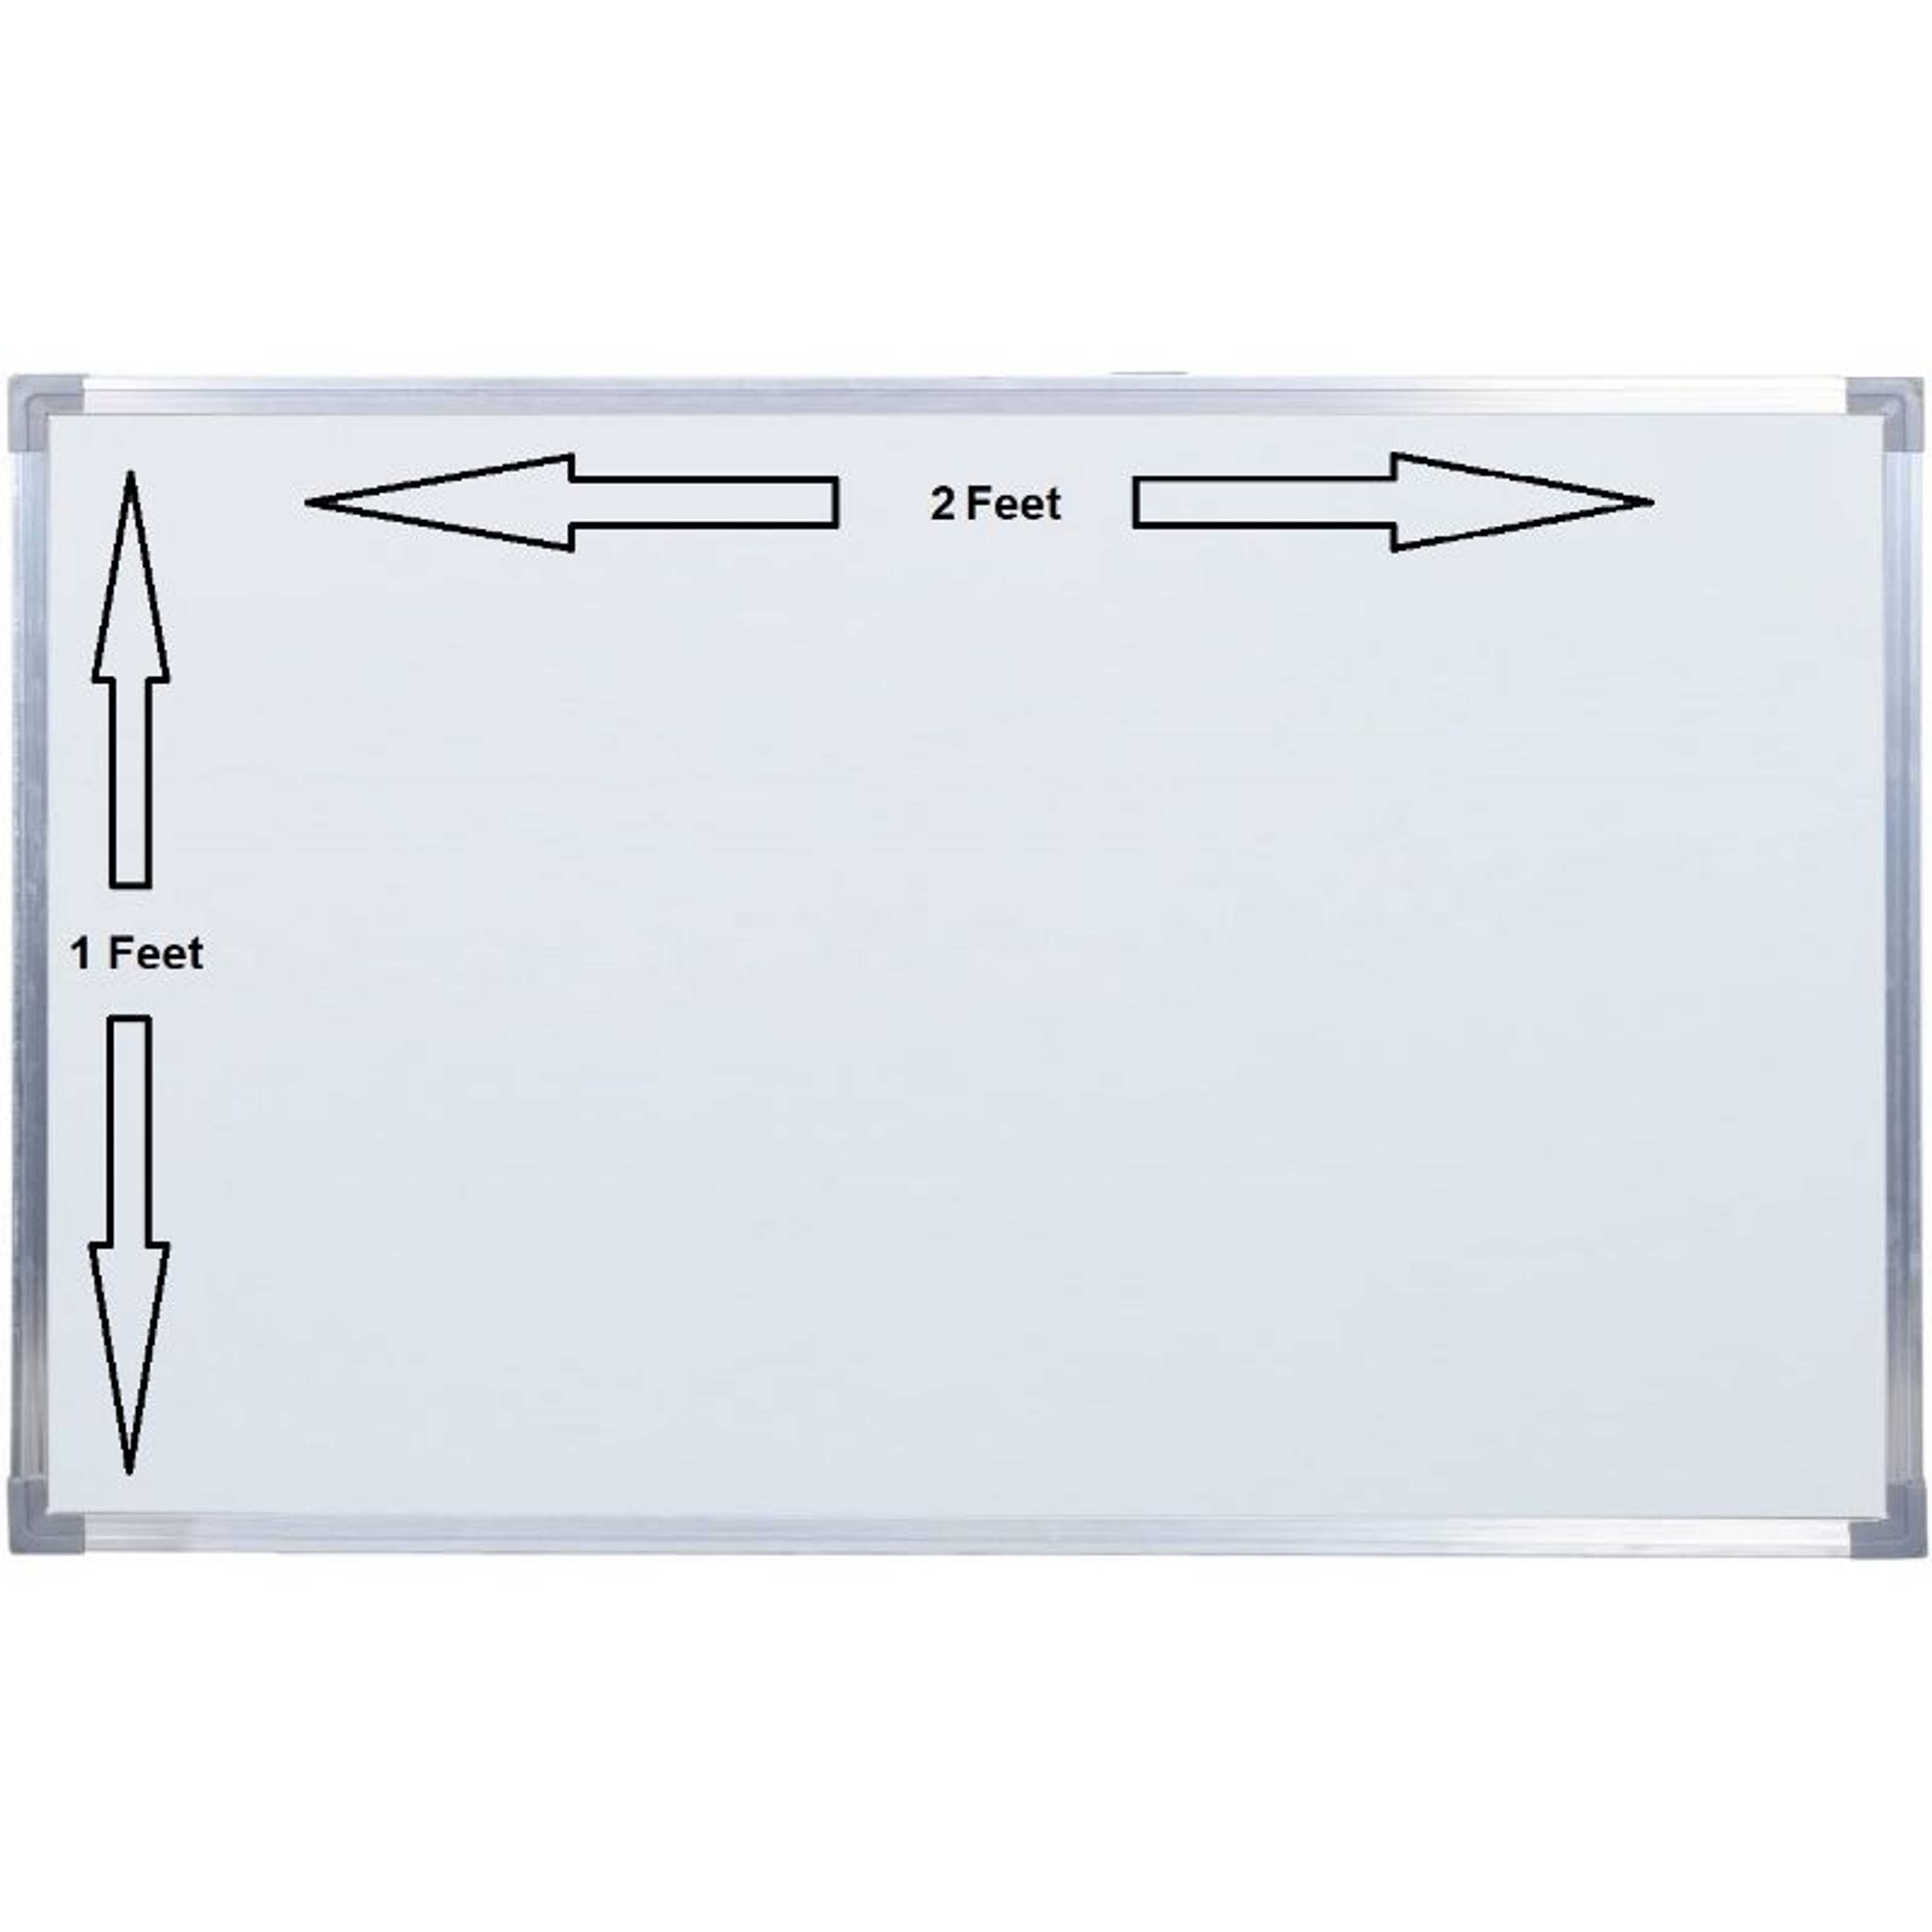 1ft x 2ft Dry Erase White Board Hanging Writing Drawing & Planning Whiteboard